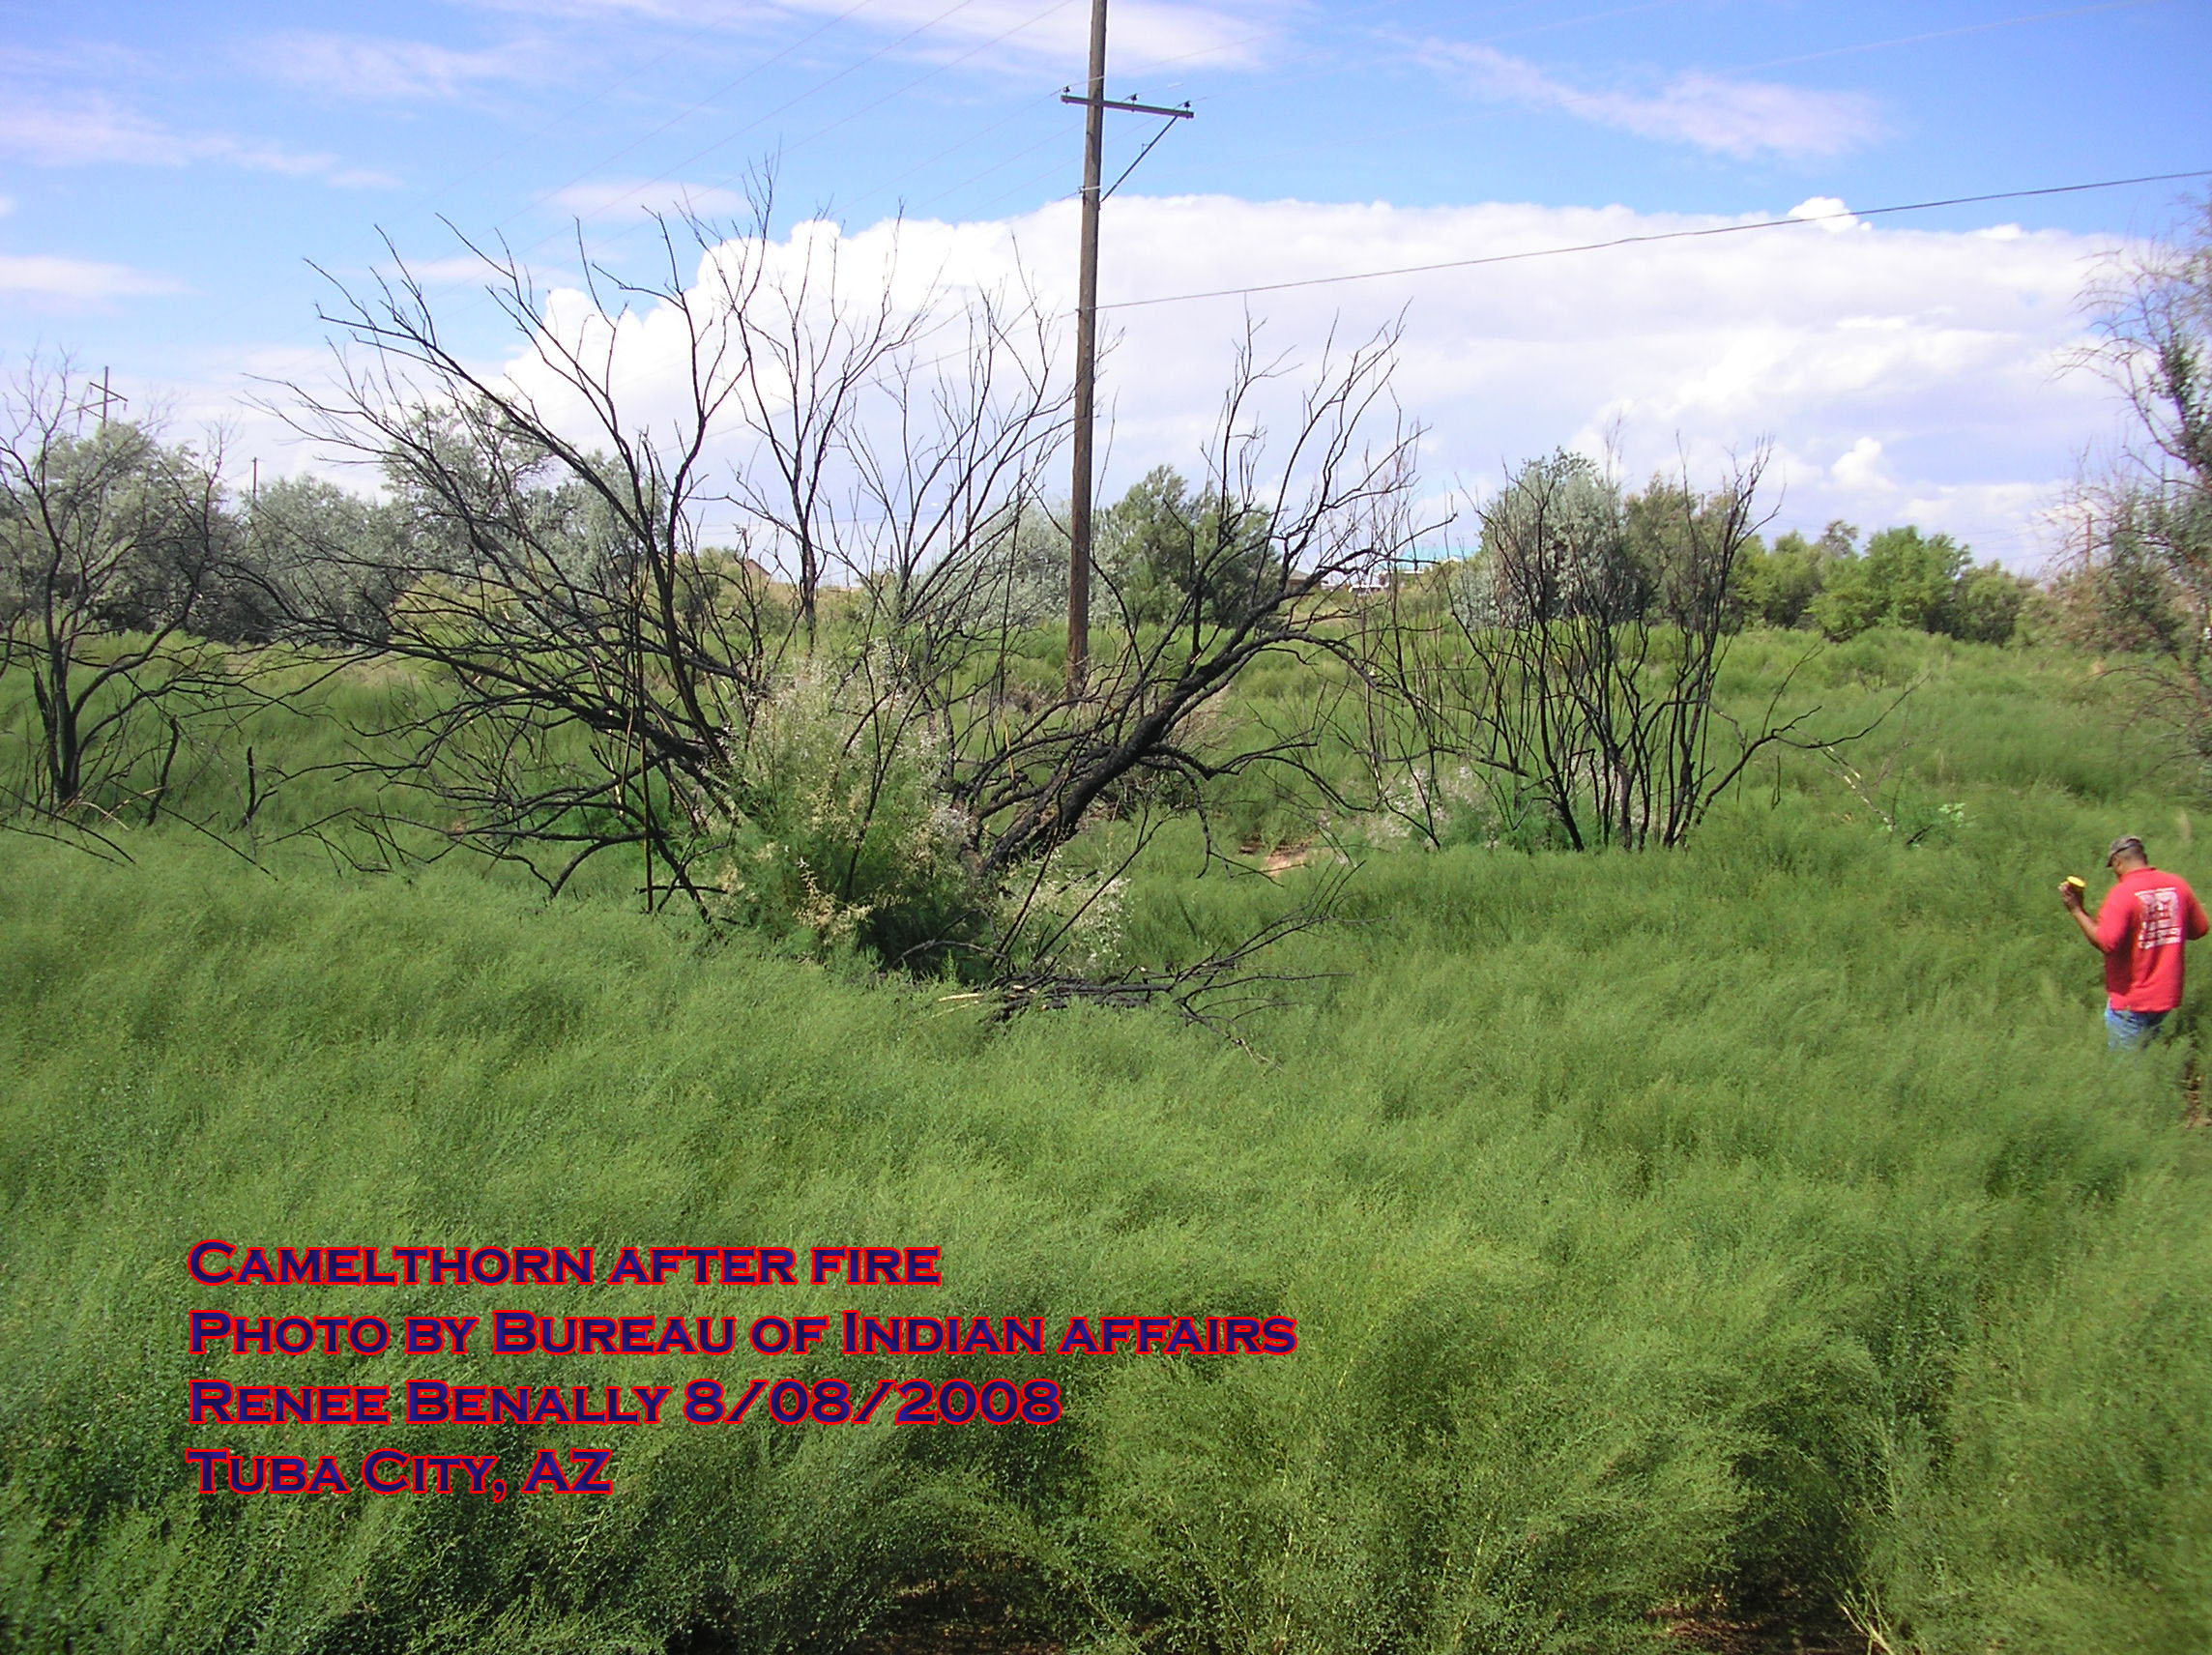 Camelthorn branches after fire (without leaves)